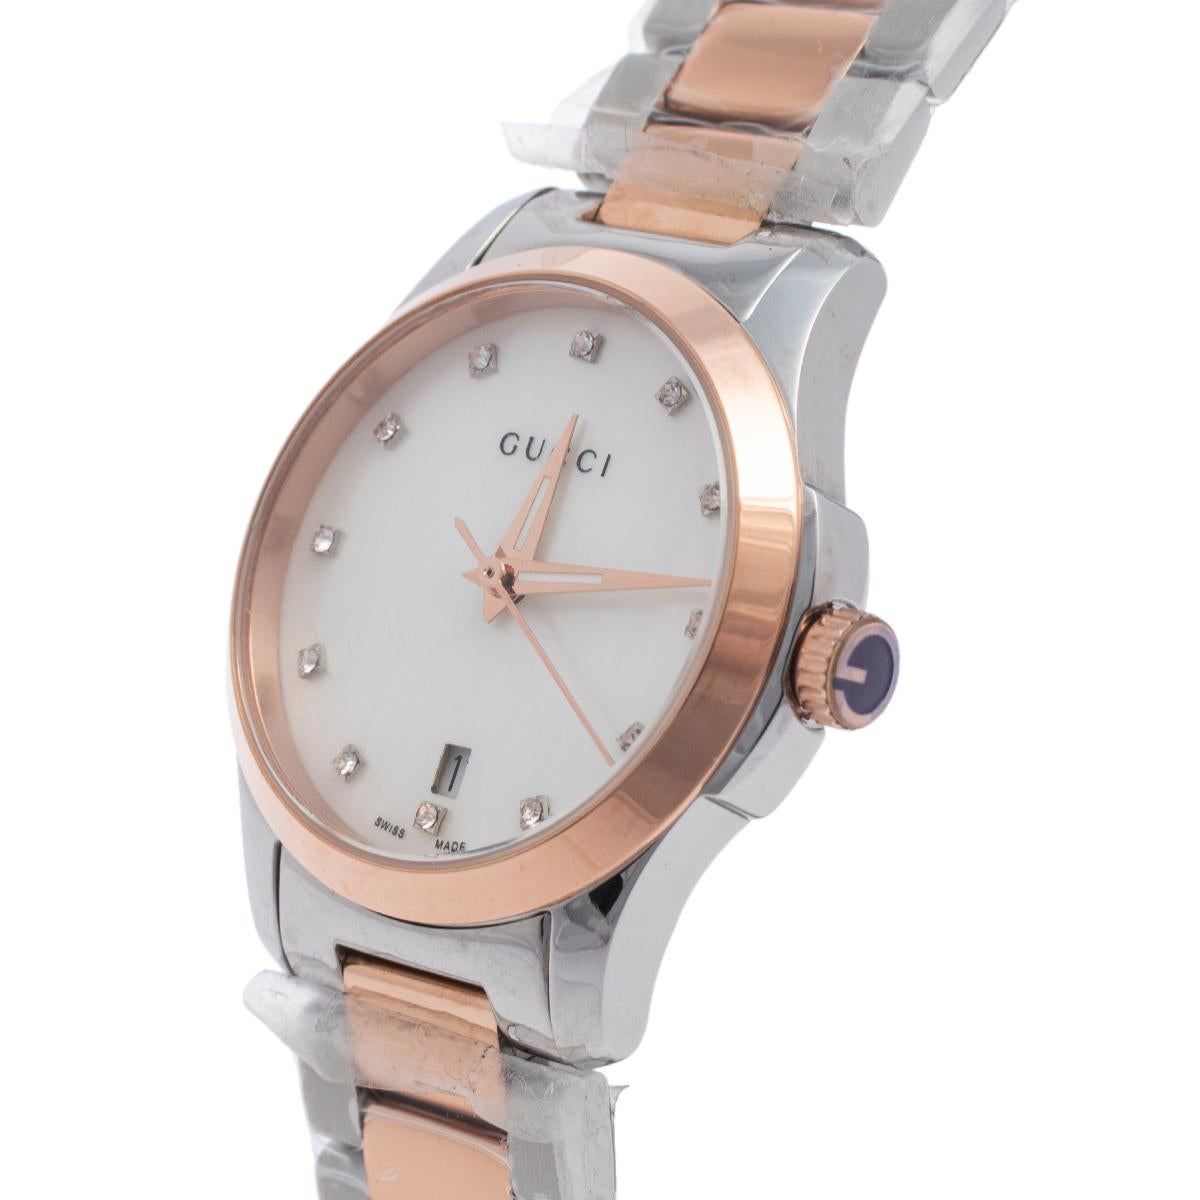 Gucci brings you this smart two-tone stainless steel timepiece for you to flaunt on your wrist. Swiss-made, it follows a quartz movement and carries a mother of pearl dial. It has a date window, stud hour markers, and three hands within the case.